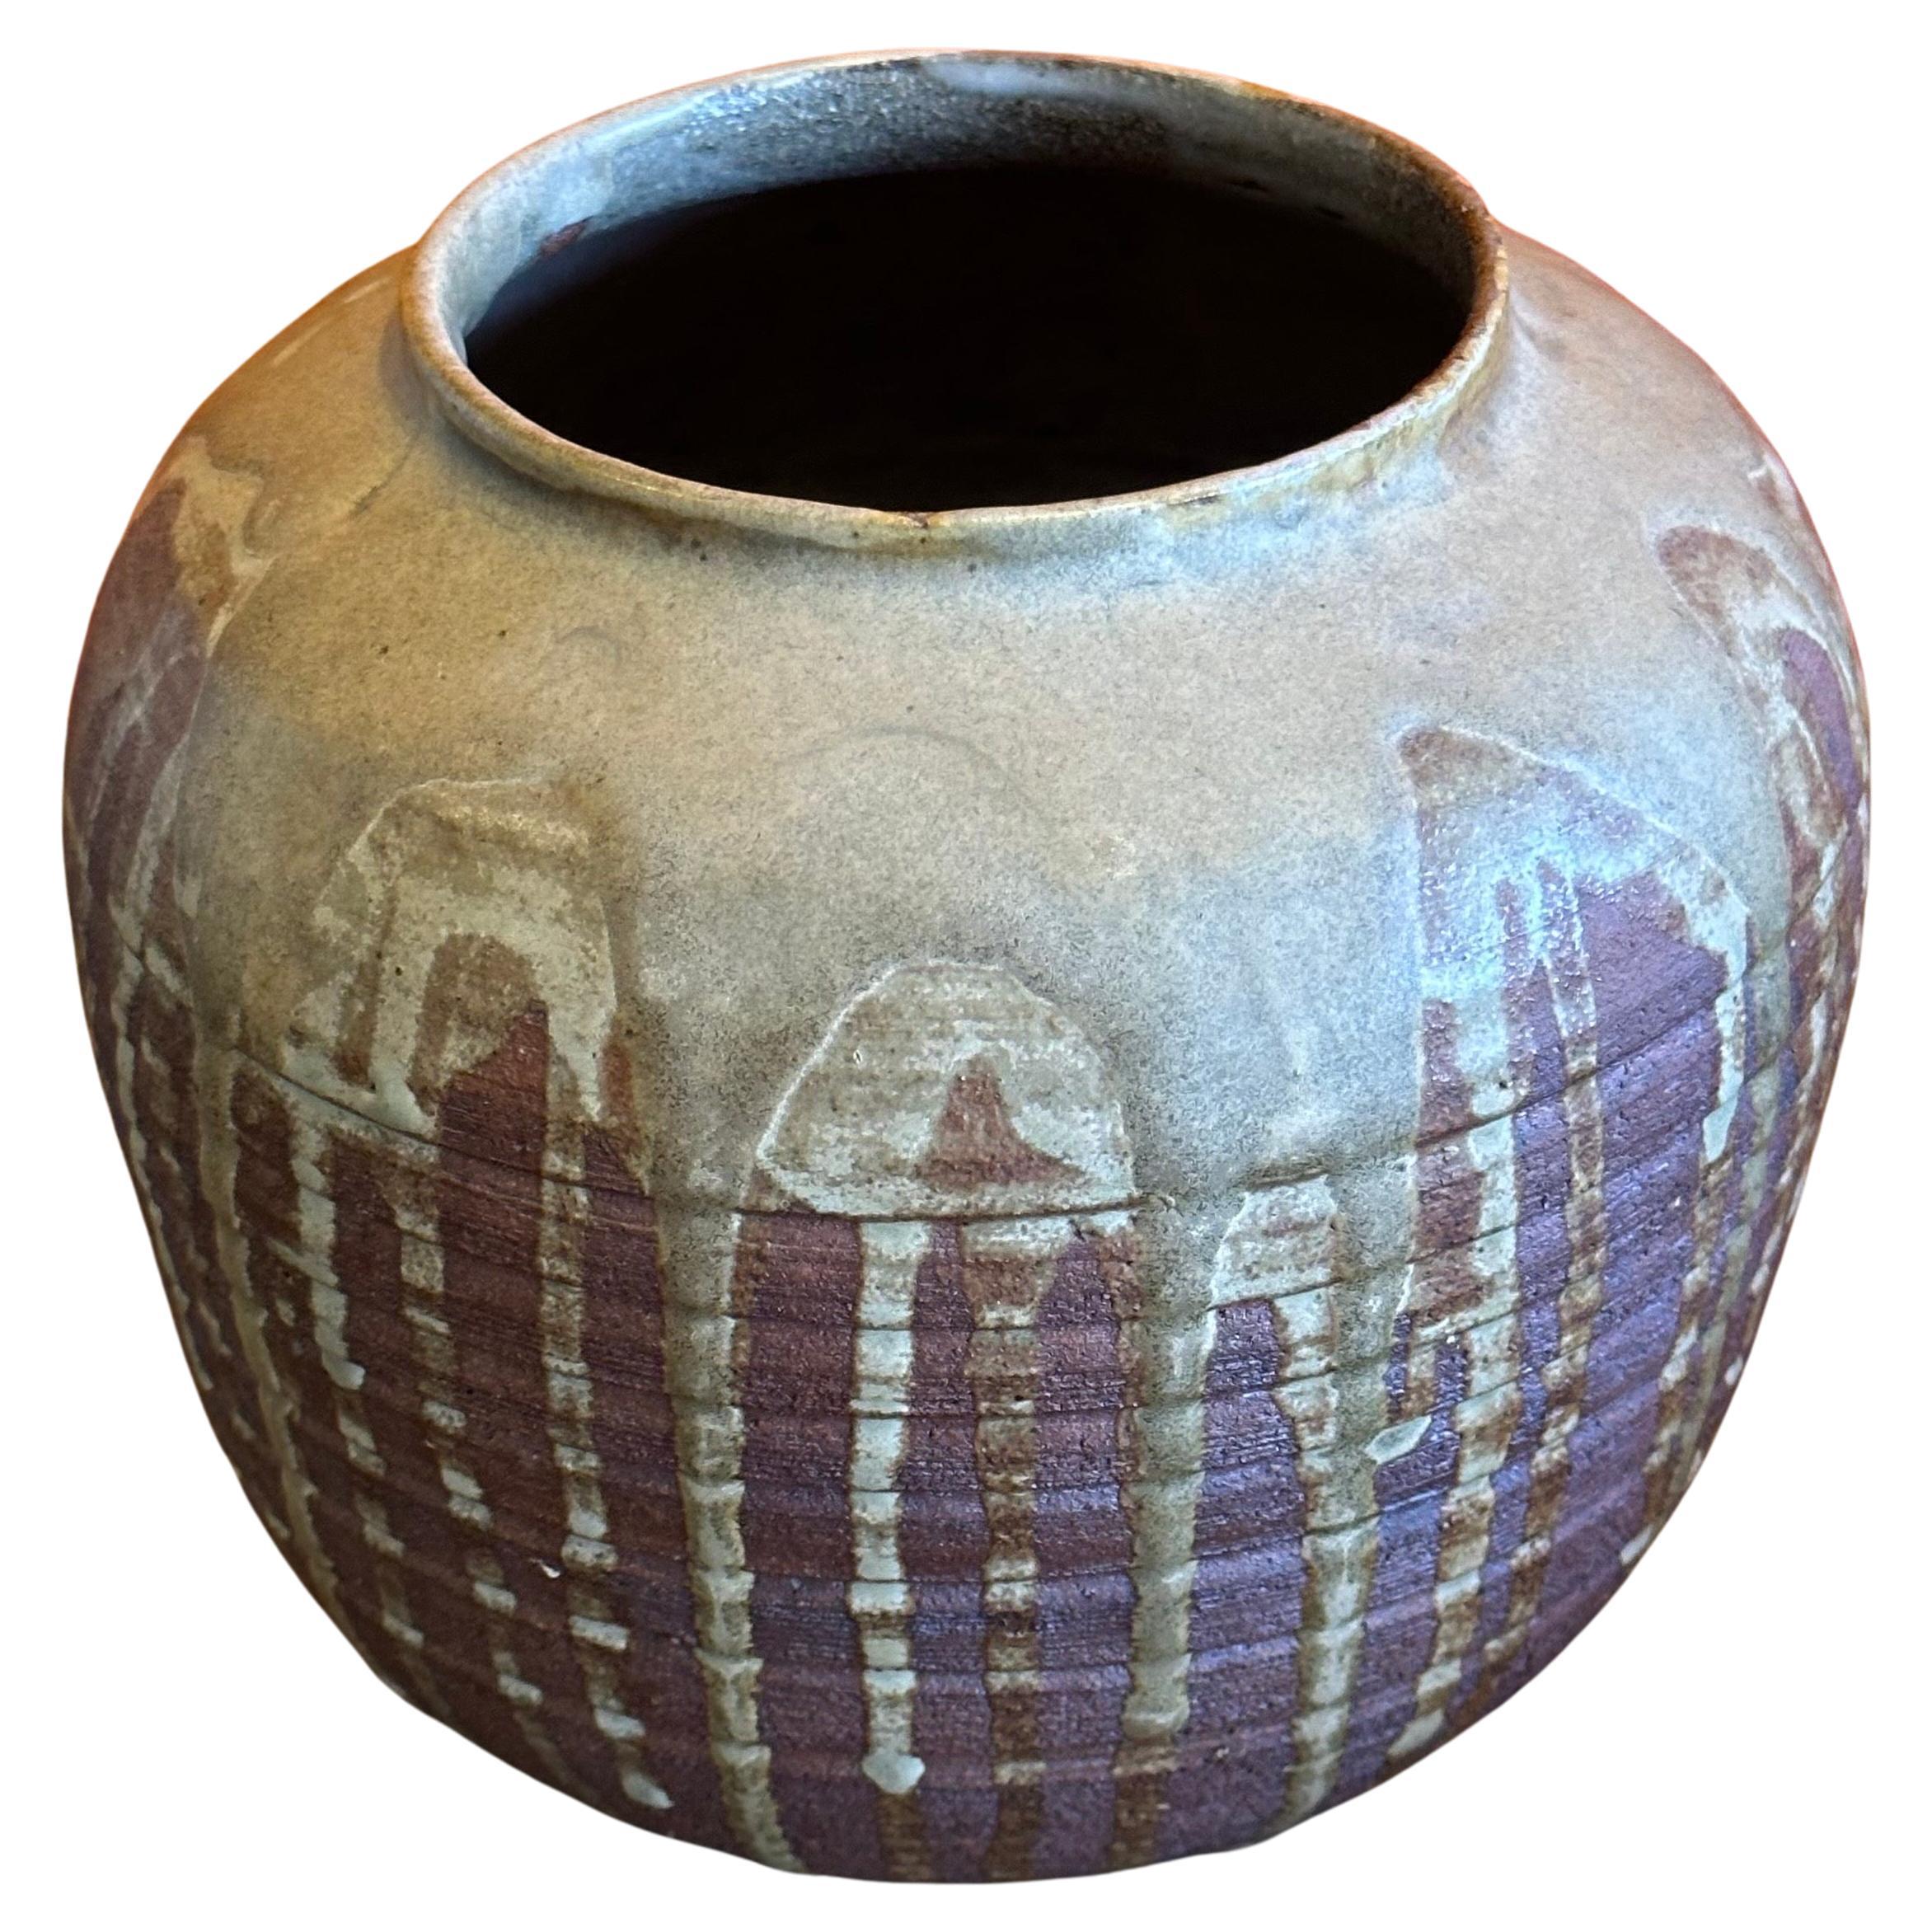 A nice MCM drip glaze studio pottery stoneware vase by Del Soto, circa 1971.  The piece is in very good vintage condition with no chips or cracks and measures 7.5